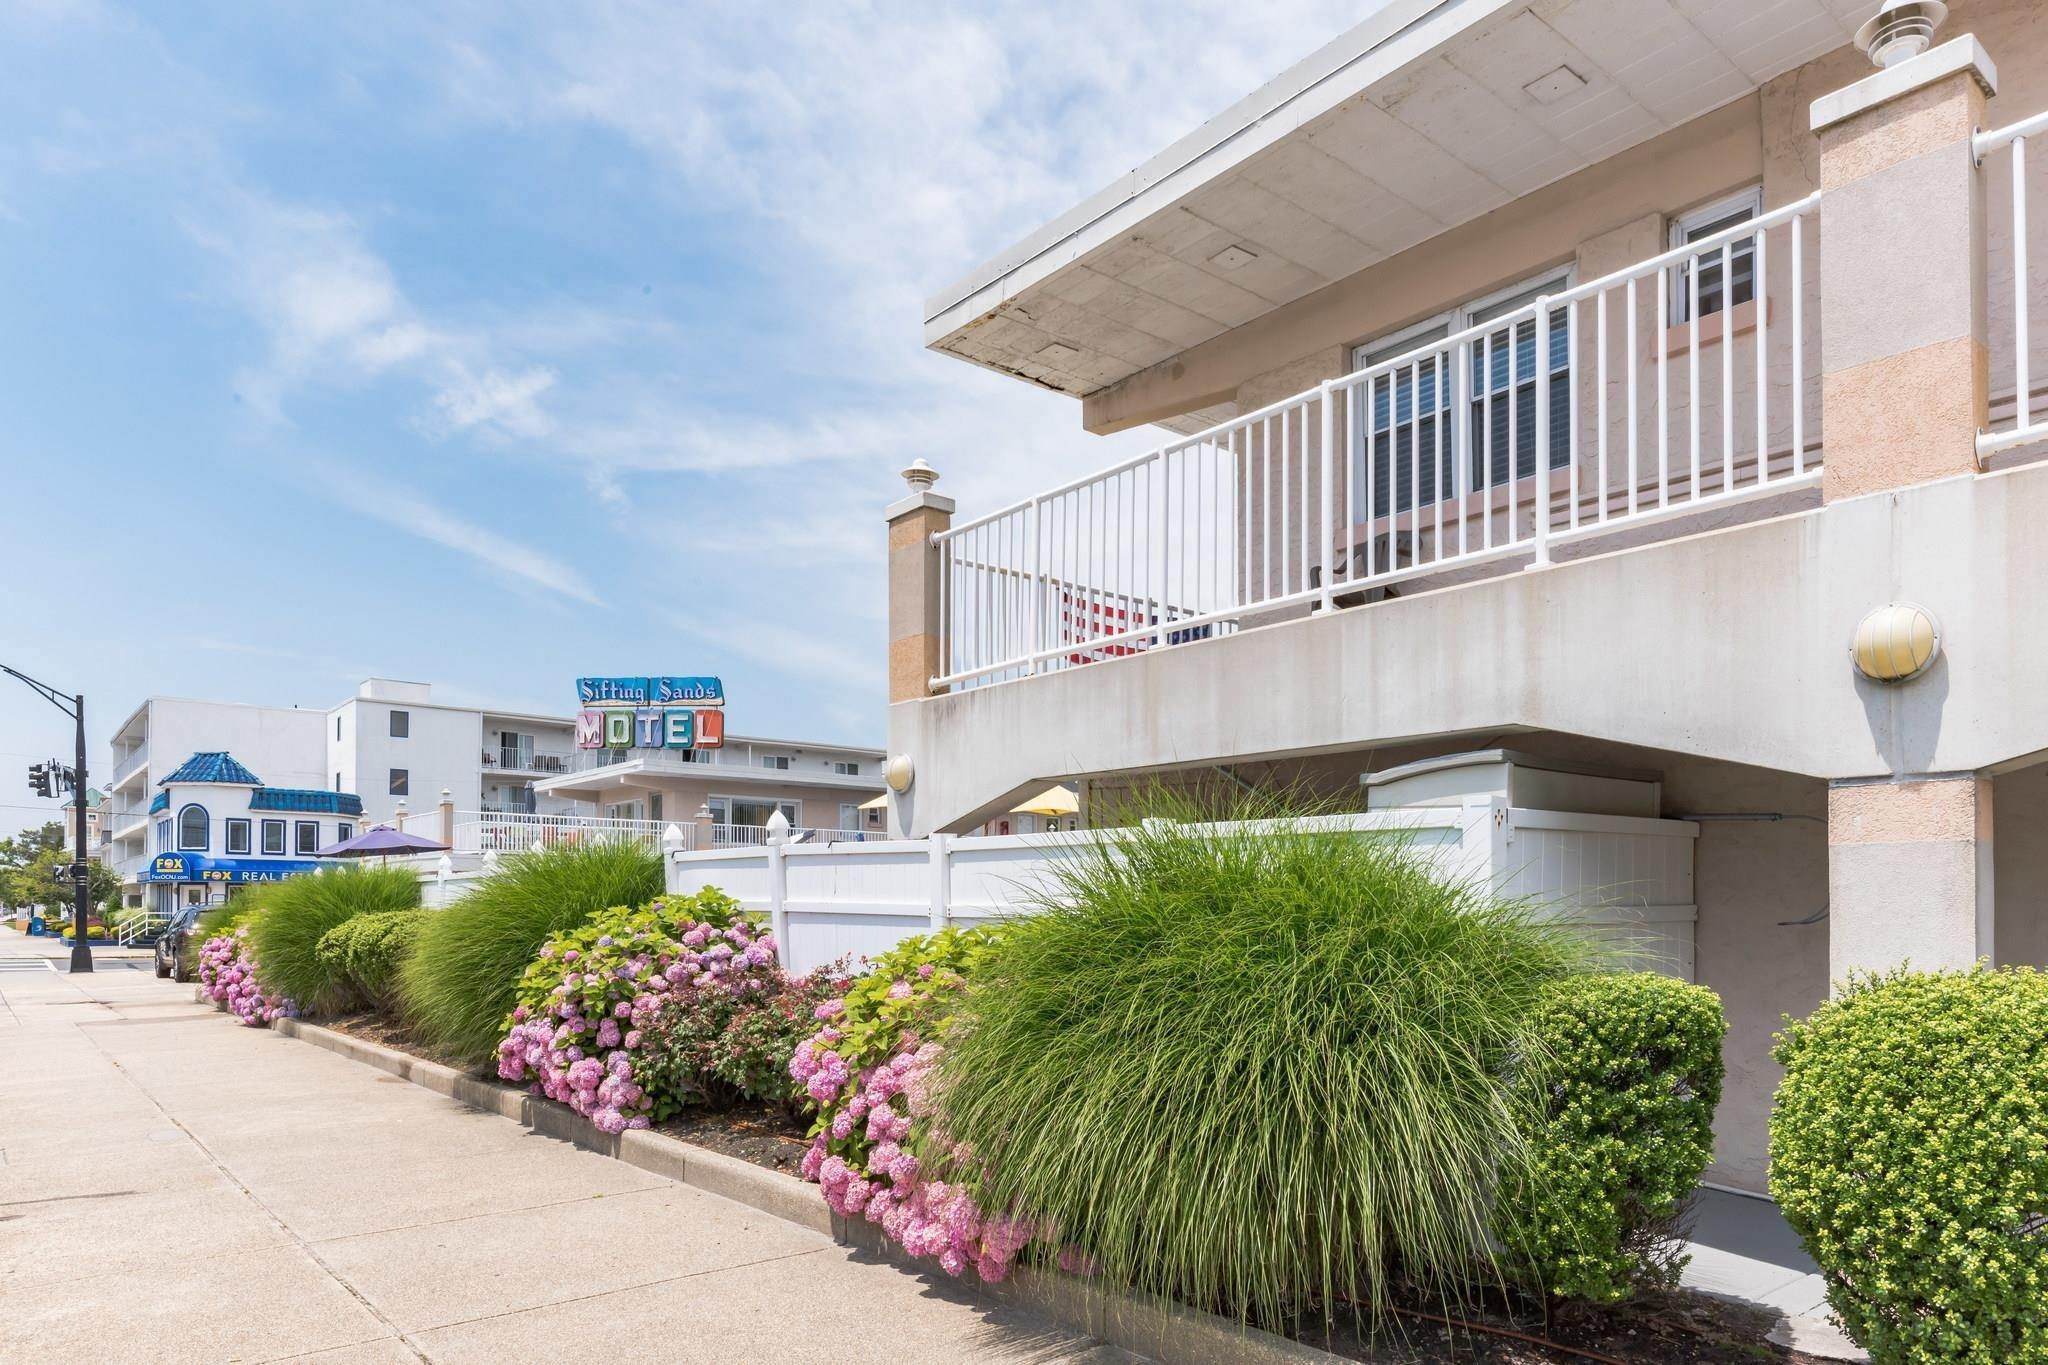 Condominiums for Sale at 840 Ocean Avenue Ocean City, New Jersey 08226 United States